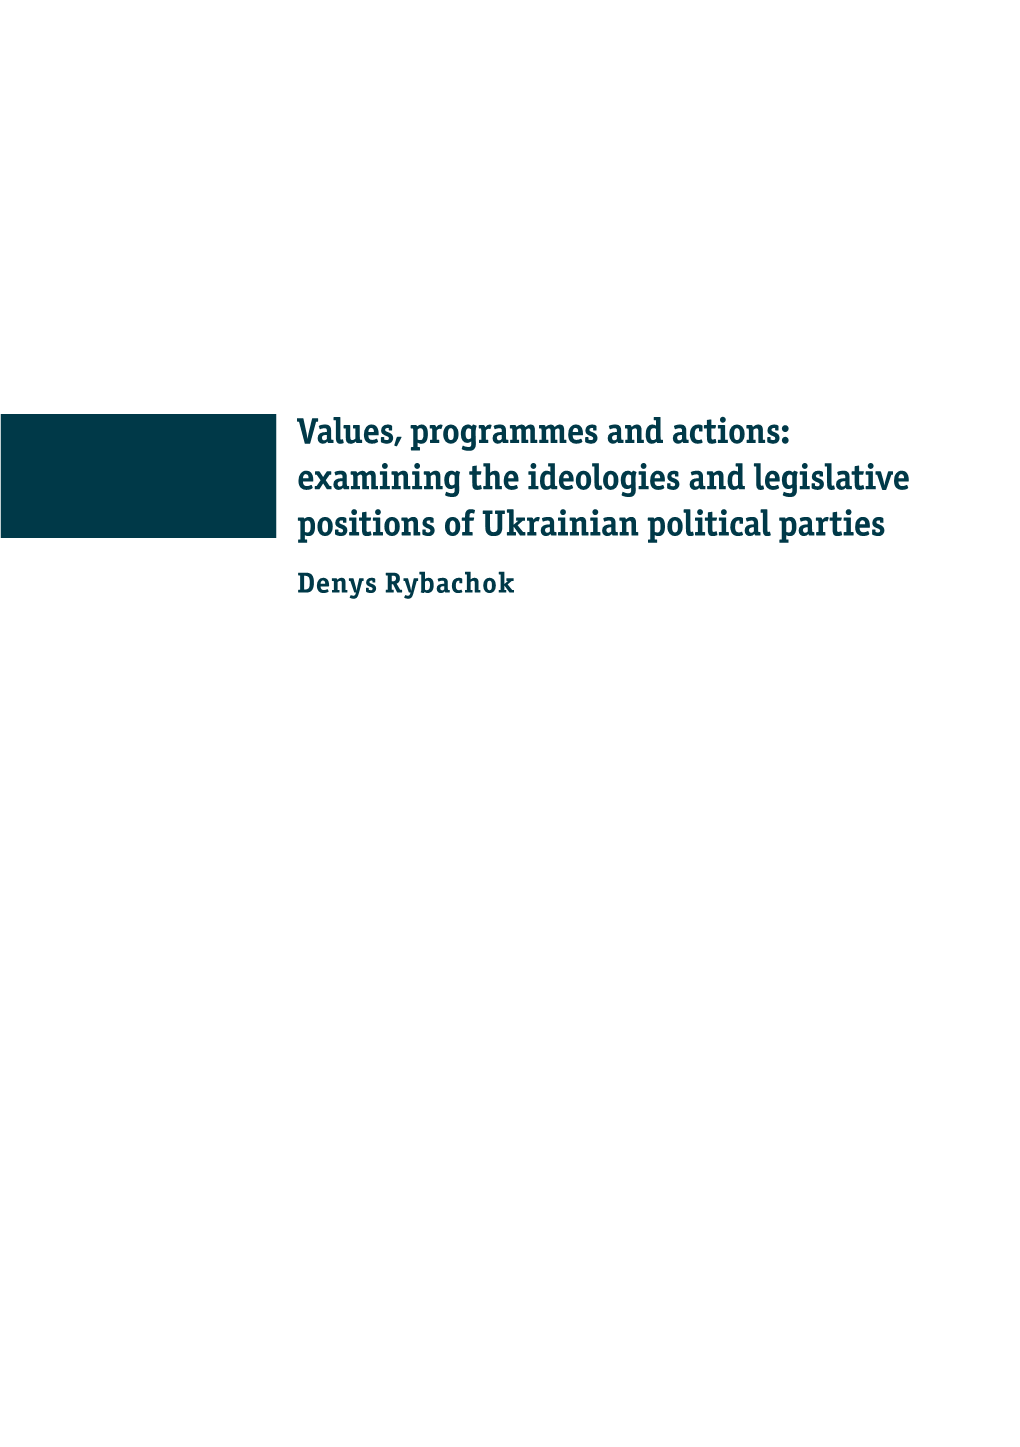 Values, Programmes and Actions: Examining the Ideologies and Legislative Positions of Ukrainian Political Parties Denys Rybachok